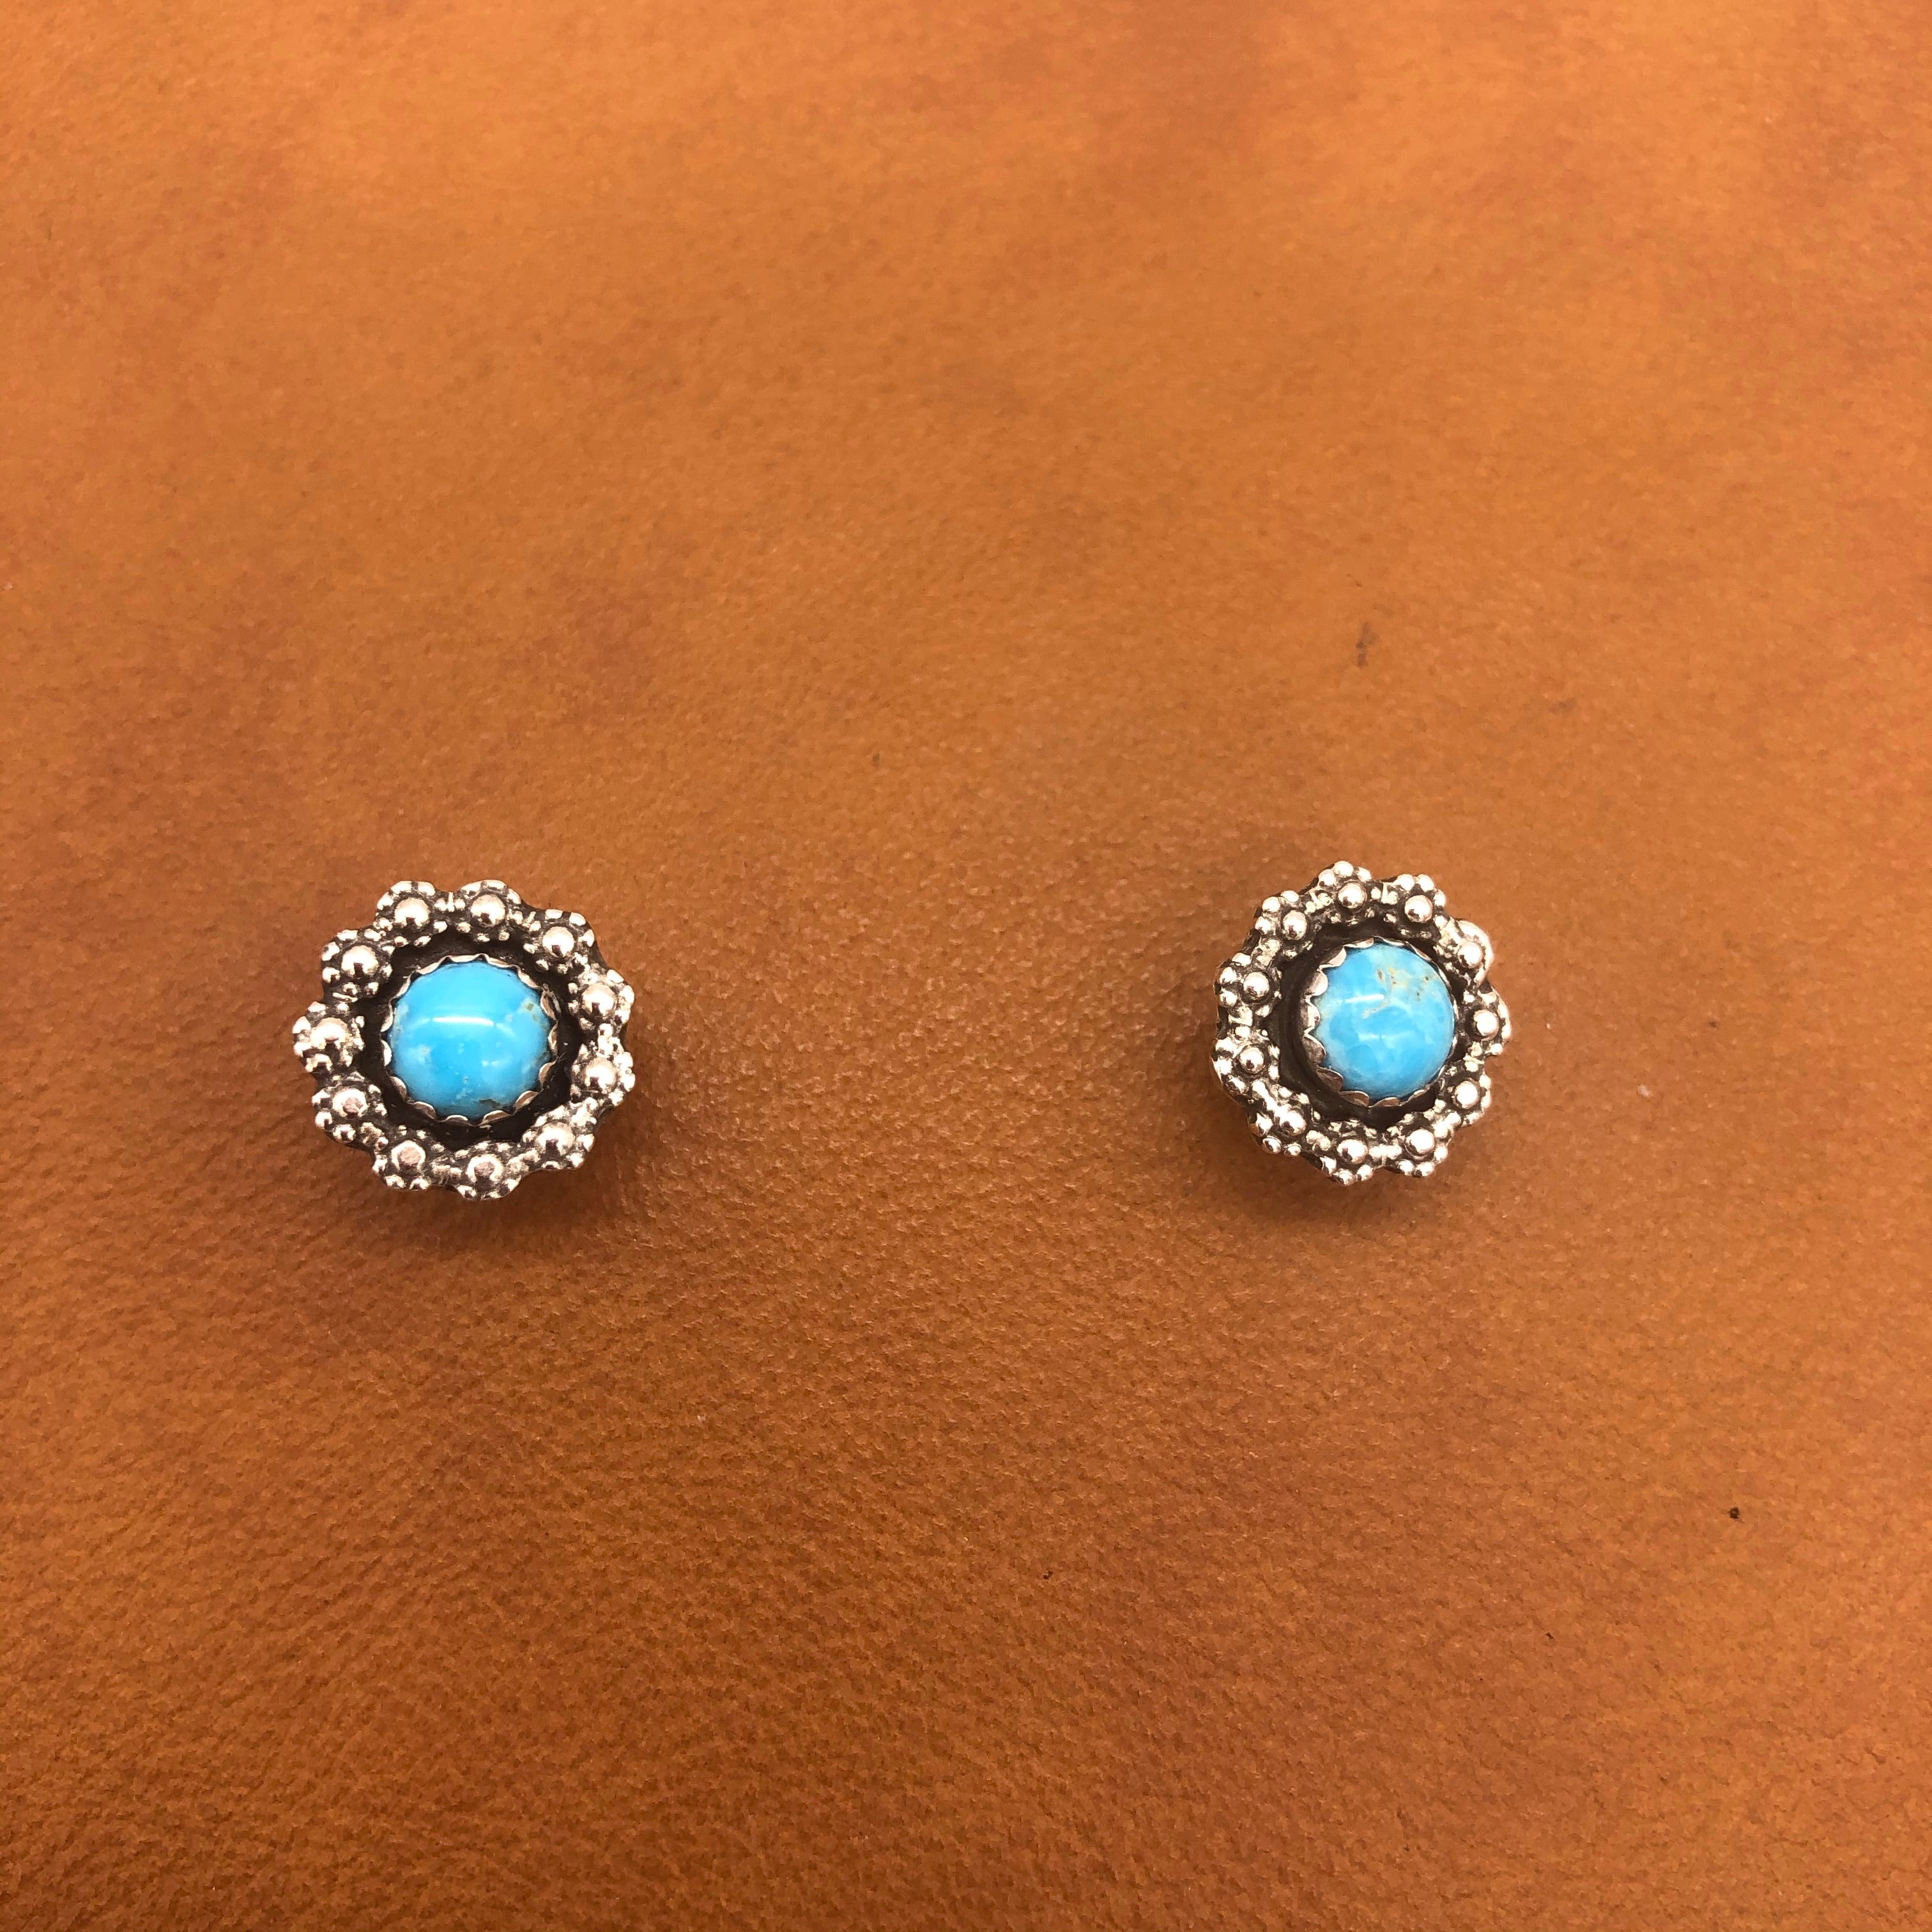 Buy Natural Turquoise Studs Earrings, Turquoise Minimalist Earrings,  Birthstone Jewelry, Turquoise Solitaire Stud Earrings, Turquoise Jewelry  Online in India - Etsy